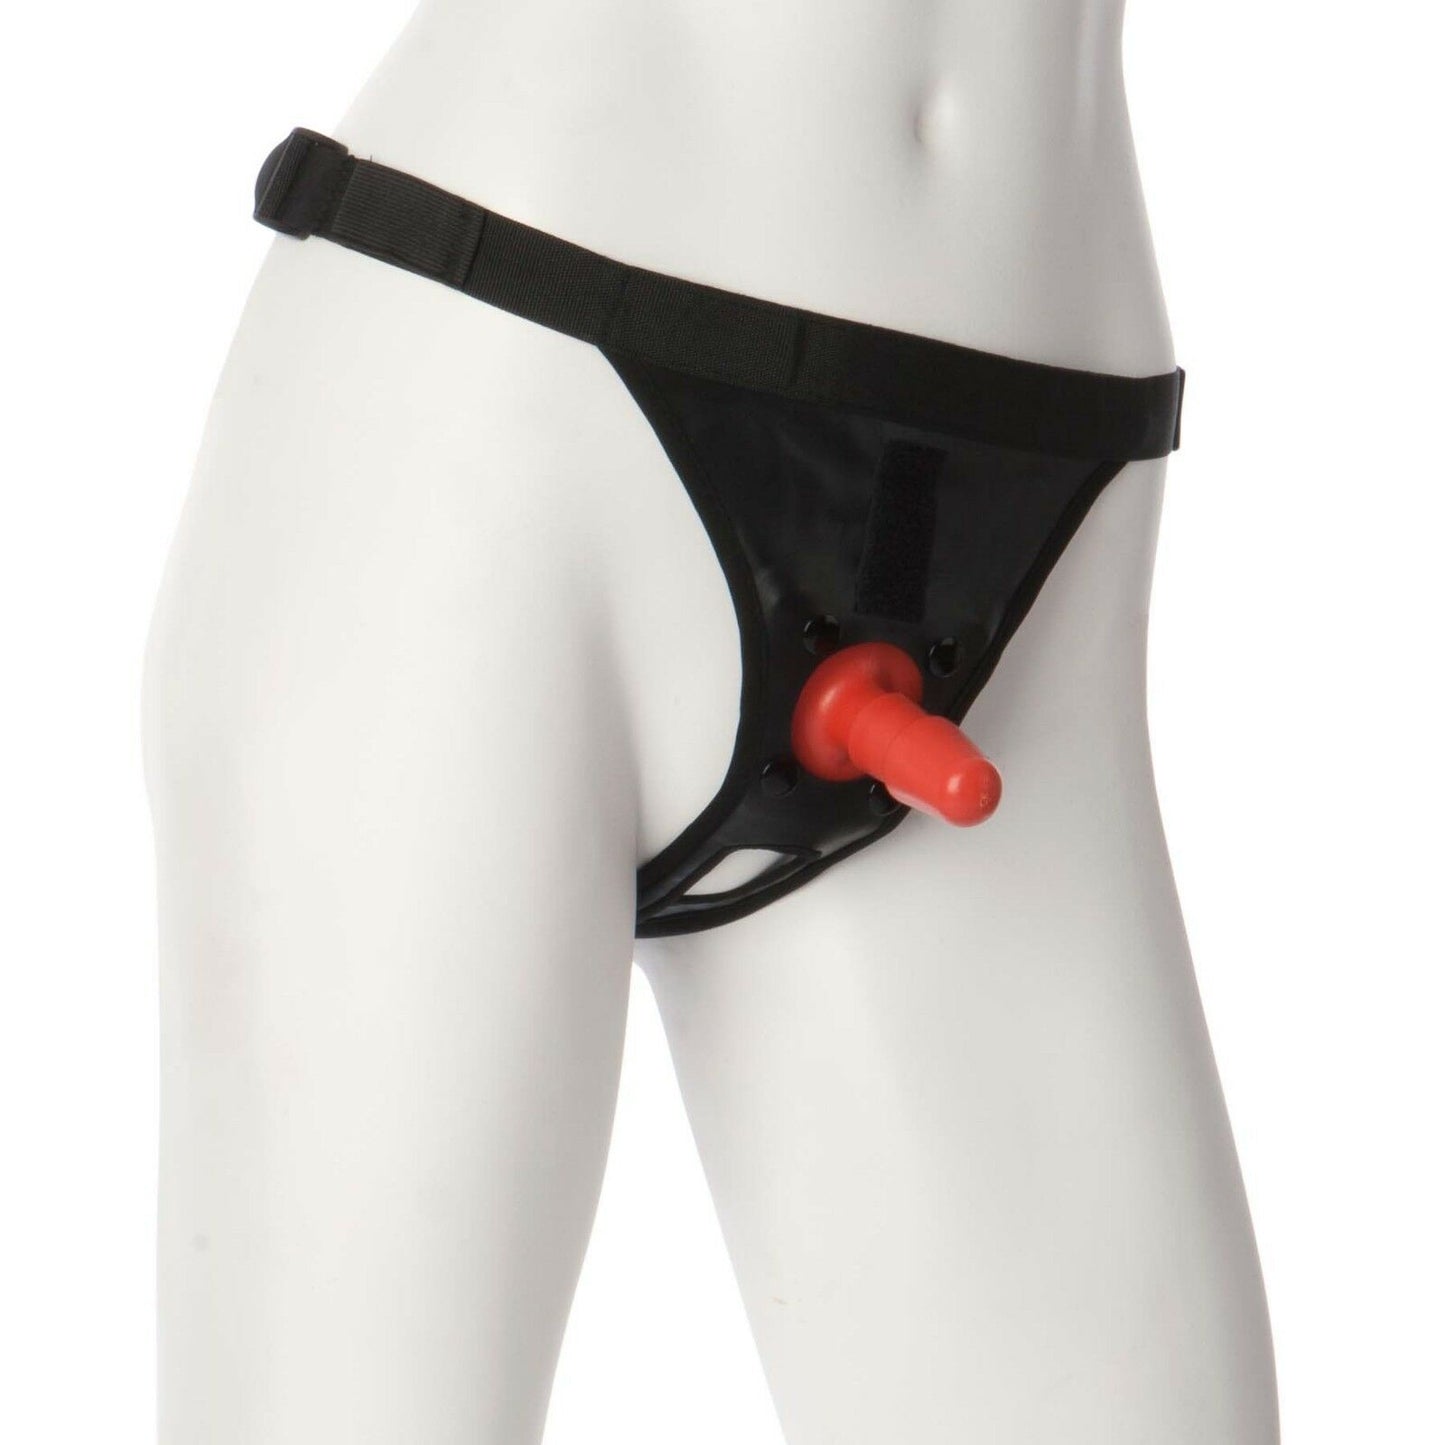 Doc Johnson Leather Ultra Harness with Plug - Red - 1010-02-BX - up to 53 " waist